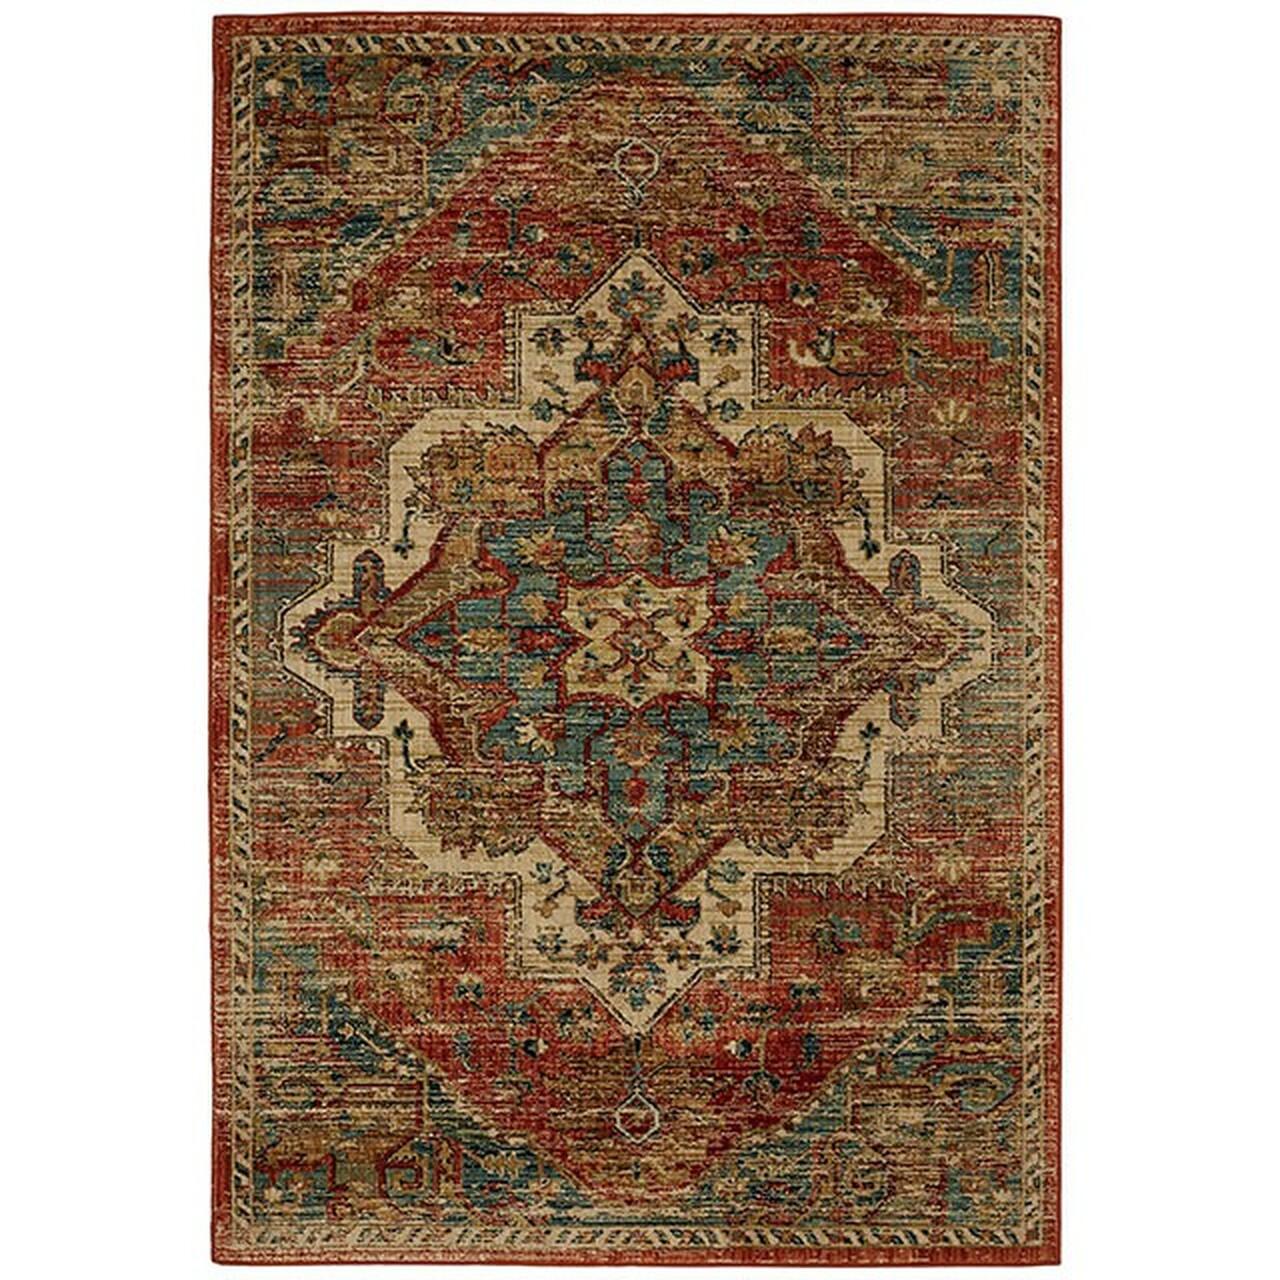 Contemporary Area Rug RG8160-S Wilhelm RG8160-S in Rose 